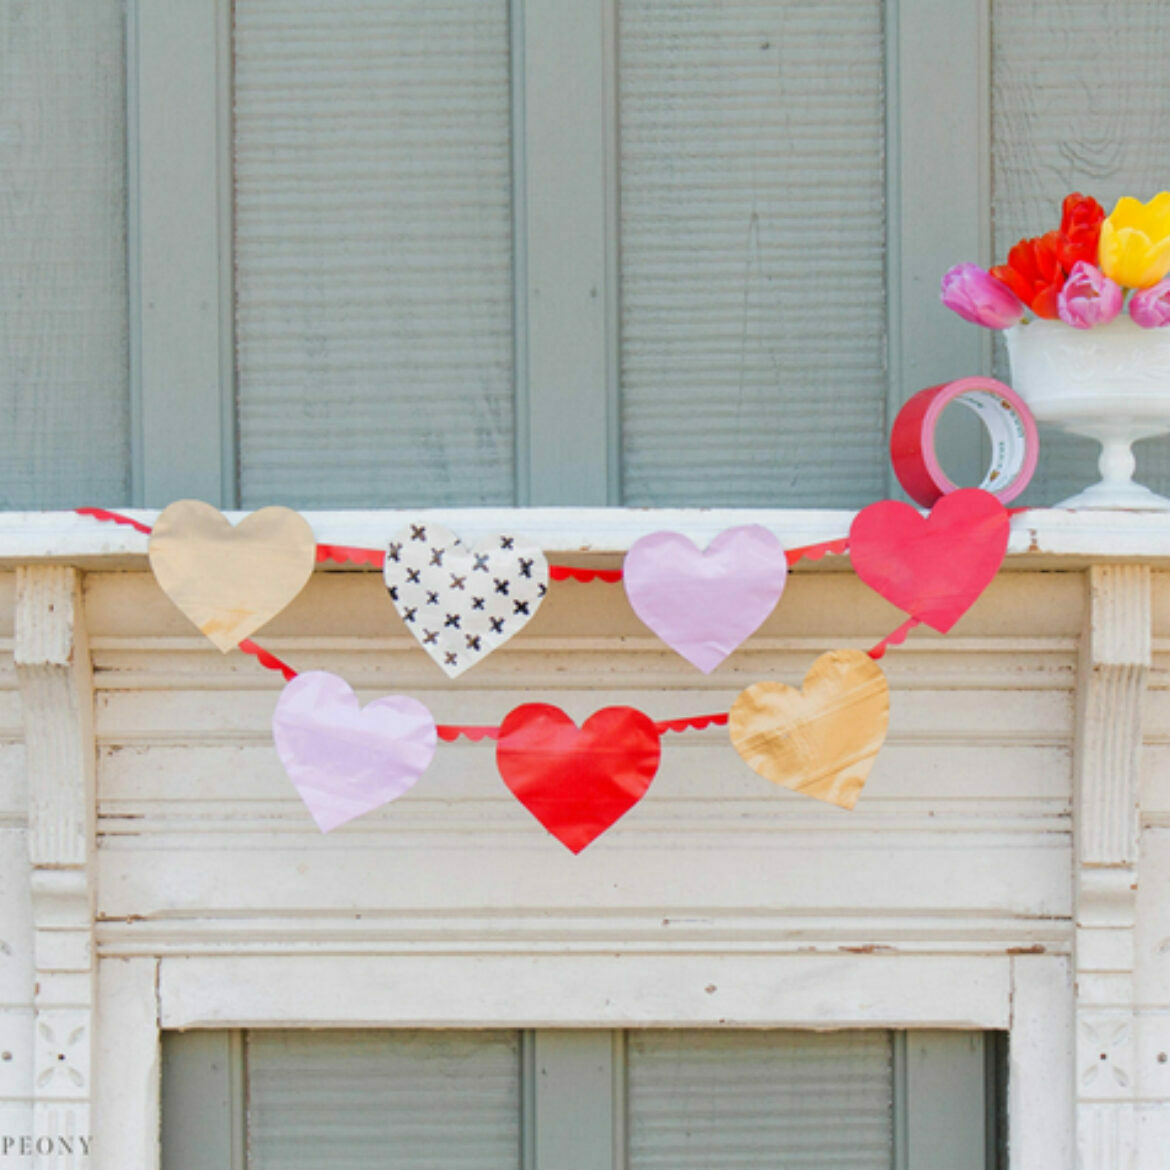 Heart garland handing over a fireplace mantle with 7 hearts of various colors and prints